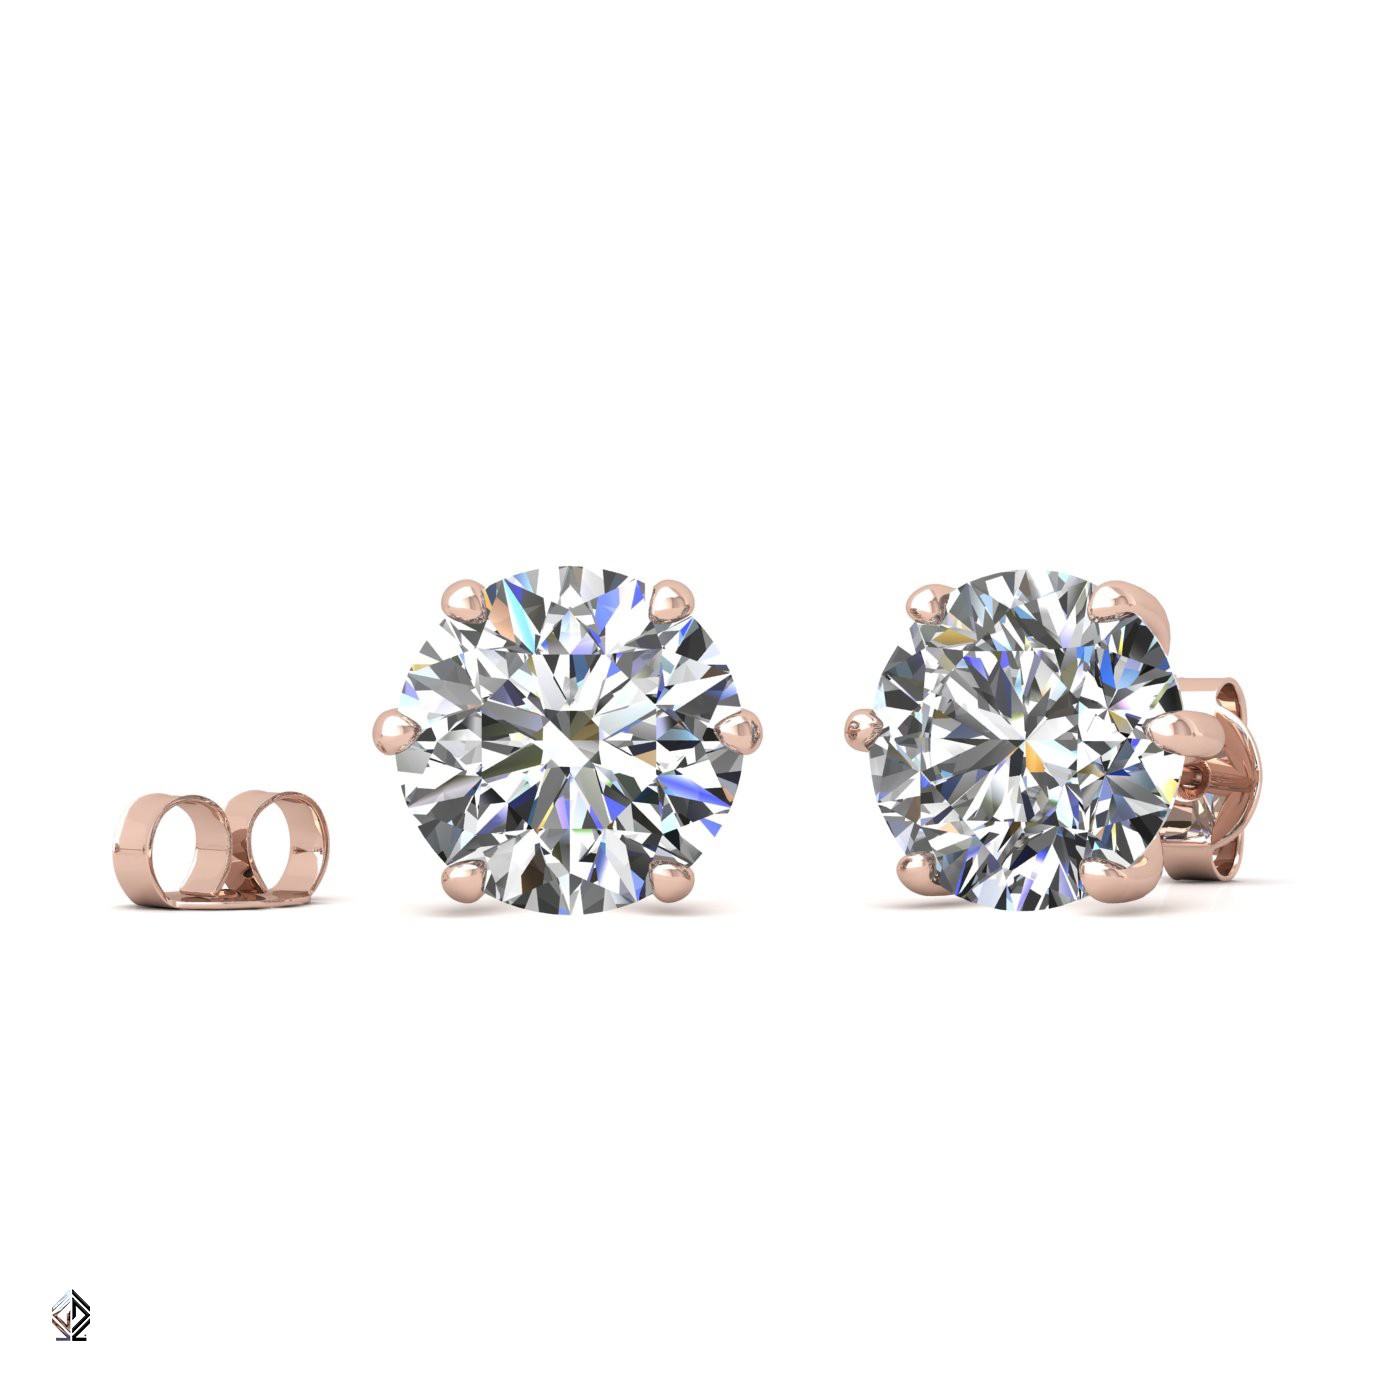 18k rose gold 1.5 ct each (3,0 tcw) 6 prongs round shape diamond earrings Photos & images